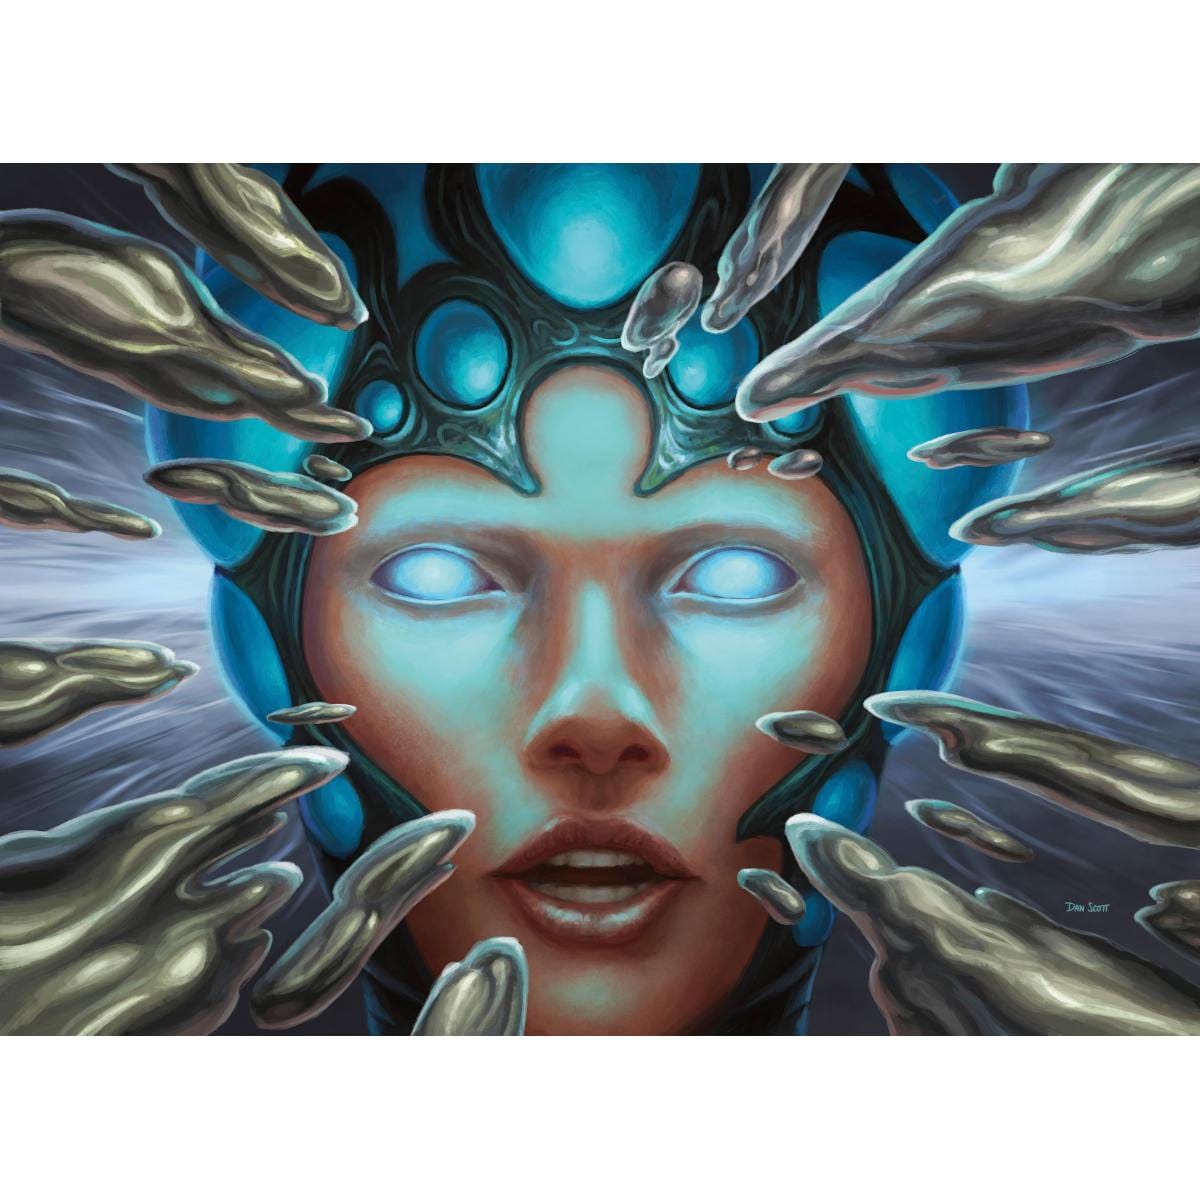 Serum Visions Print - Print - Original Magic Art - Accessories for Magic the Gathering and other card games